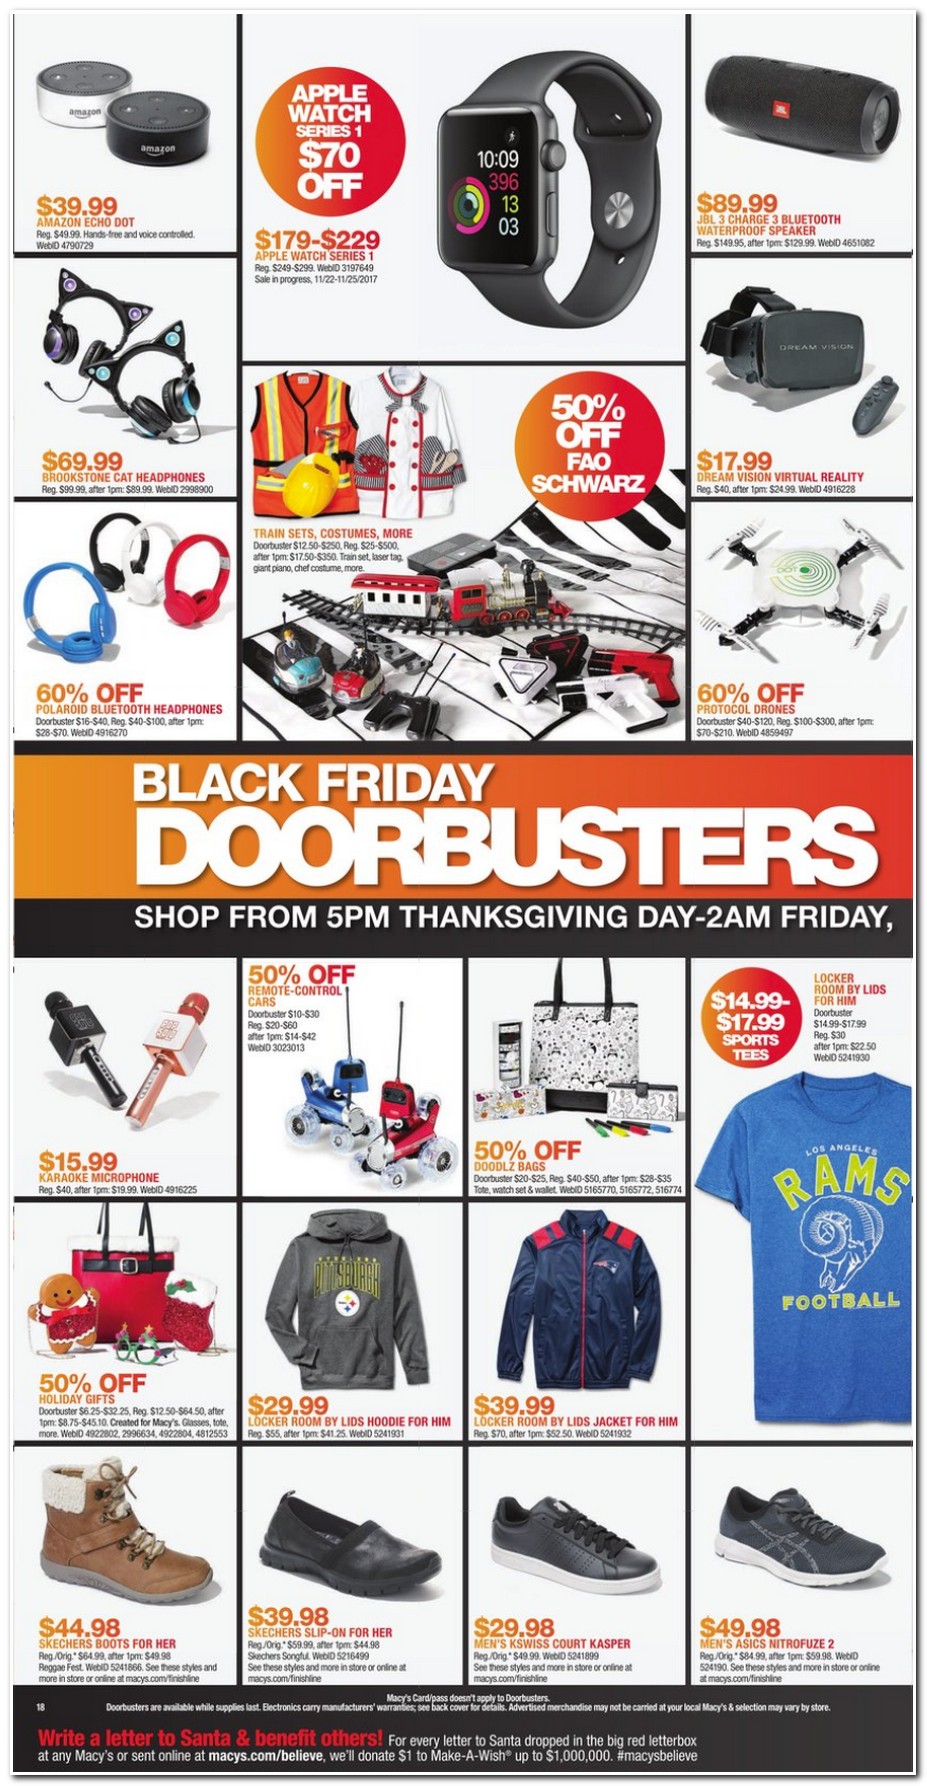 Macys Black Friday Ads, Sales, Doorbusters, and Deals 2017, Promo Codes, Deals 2018 - CouponShy